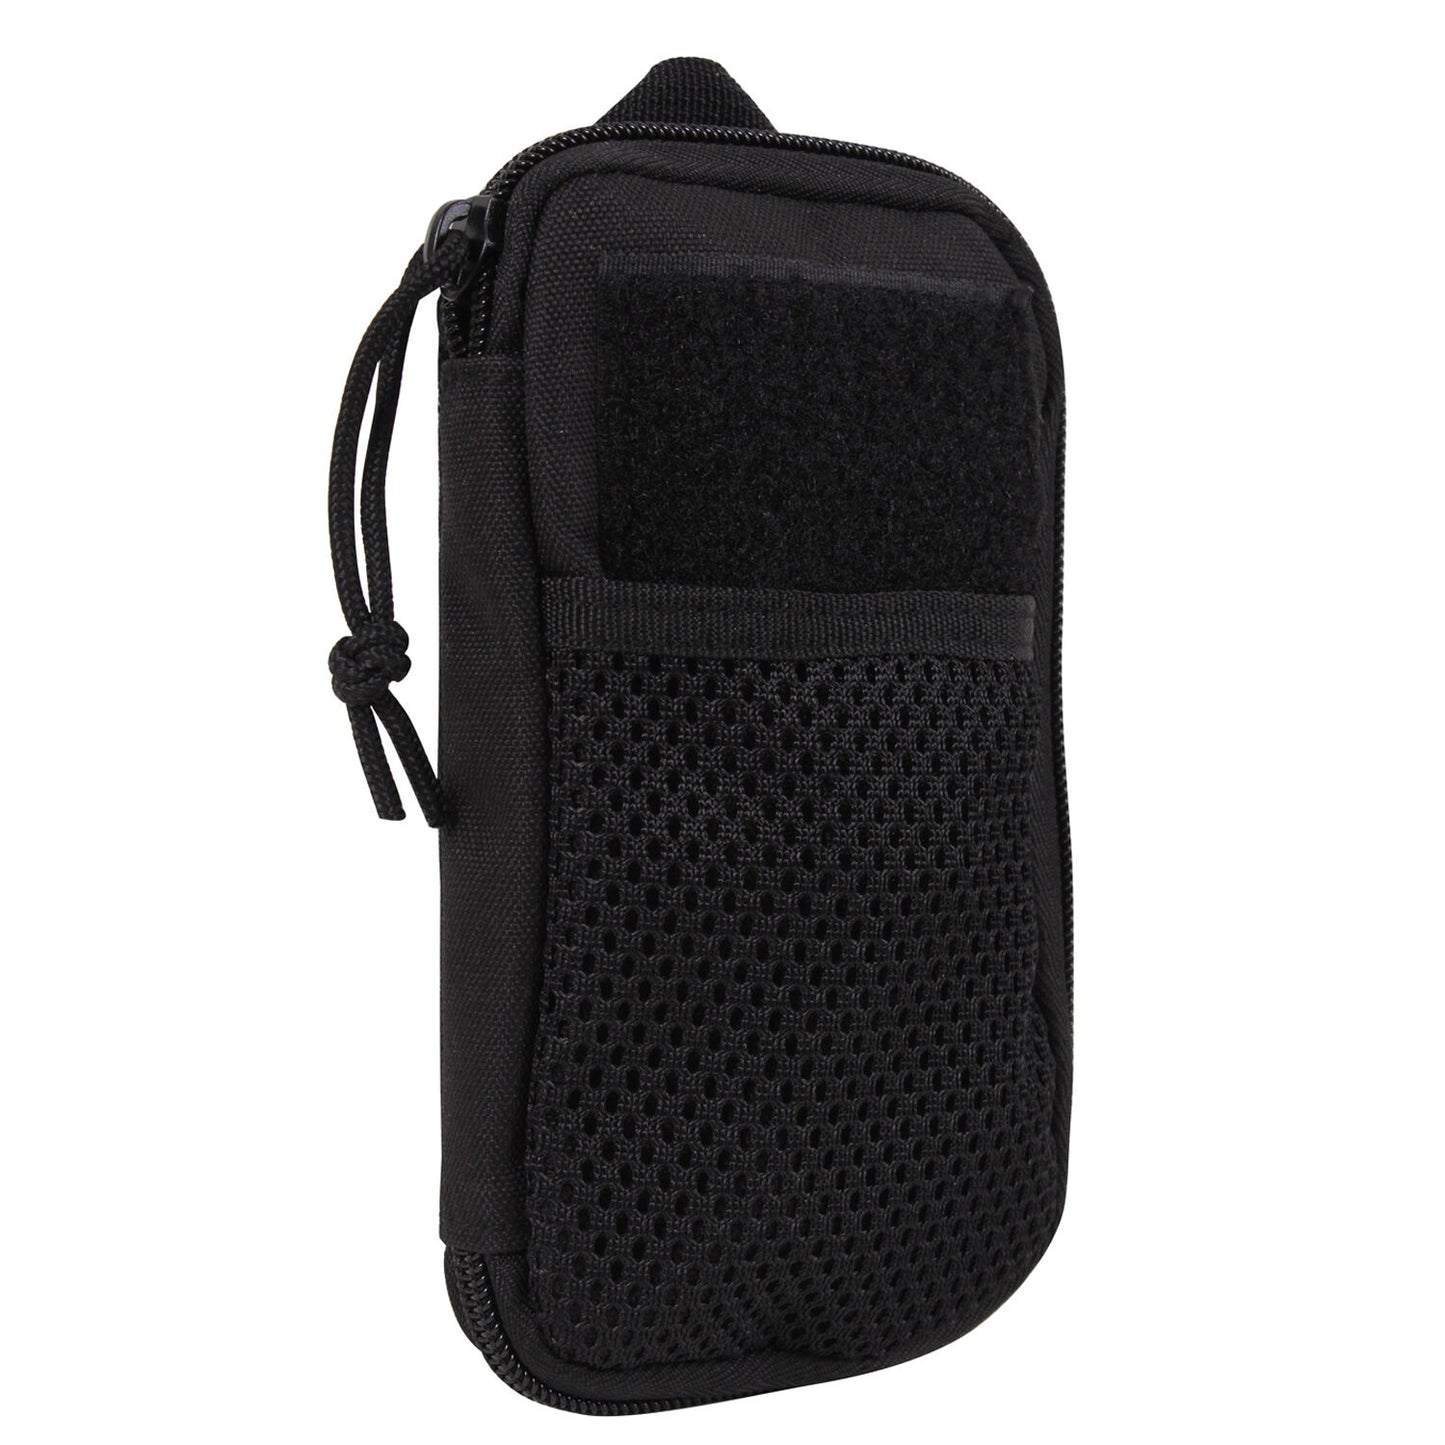 Rothco Tactical MOLLE EDC Wallet and Phone Pouch - Black